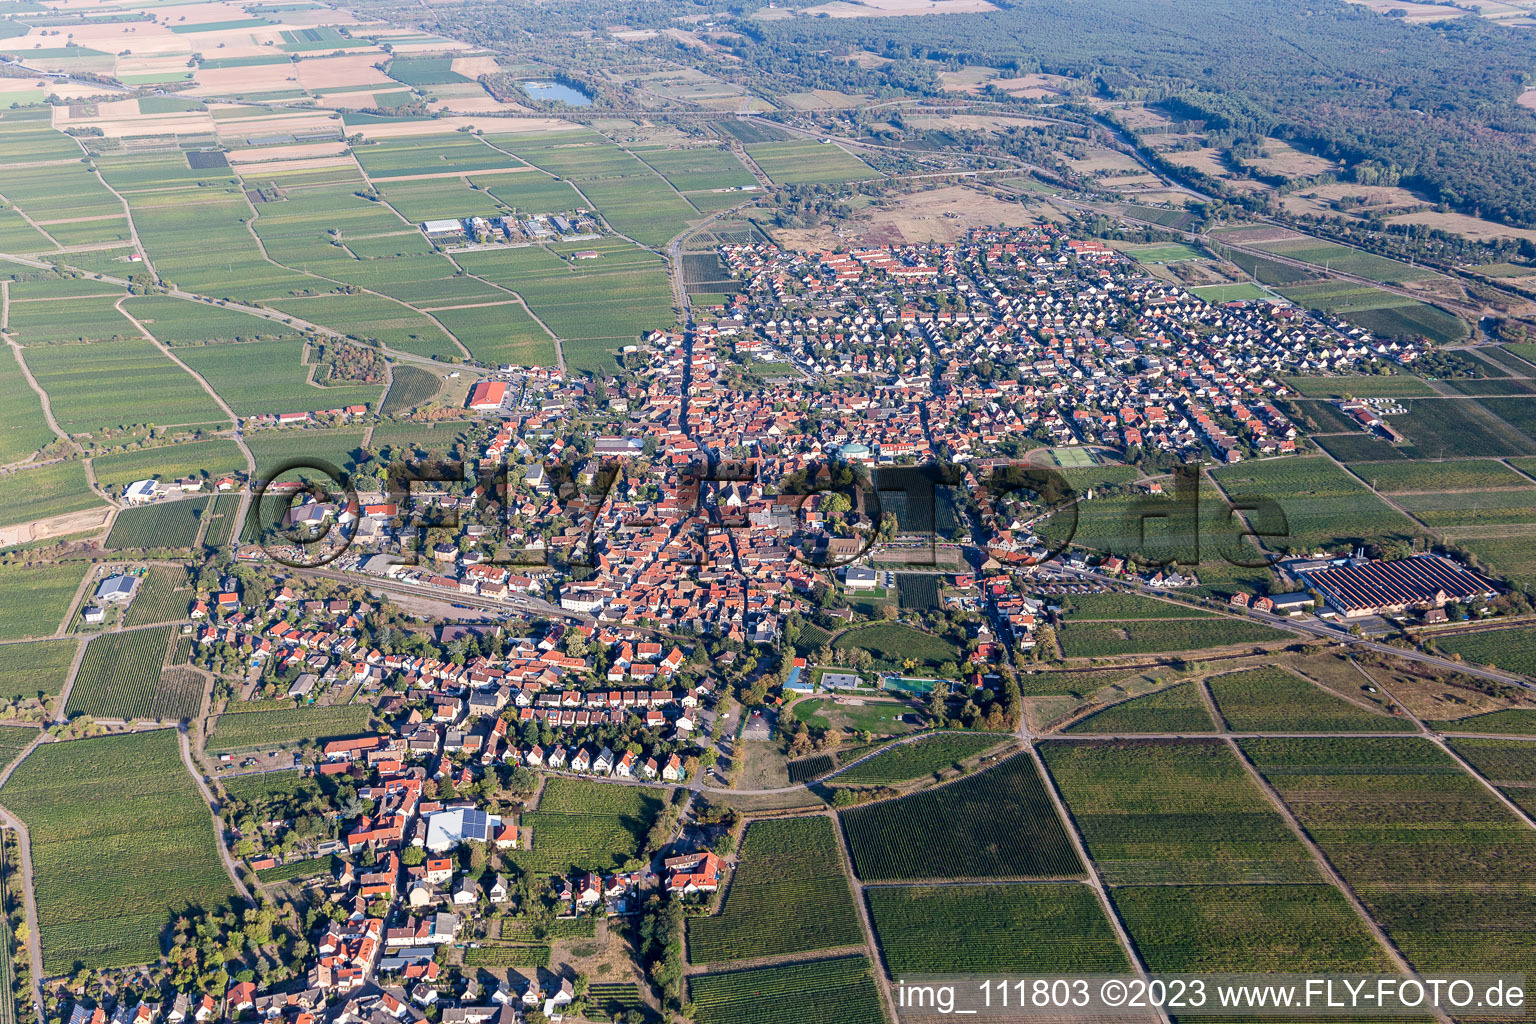 Aerial view of Mussbach in the district Mußbach in Neustadt an der Weinstraße in the state Rhineland-Palatinate, Germany